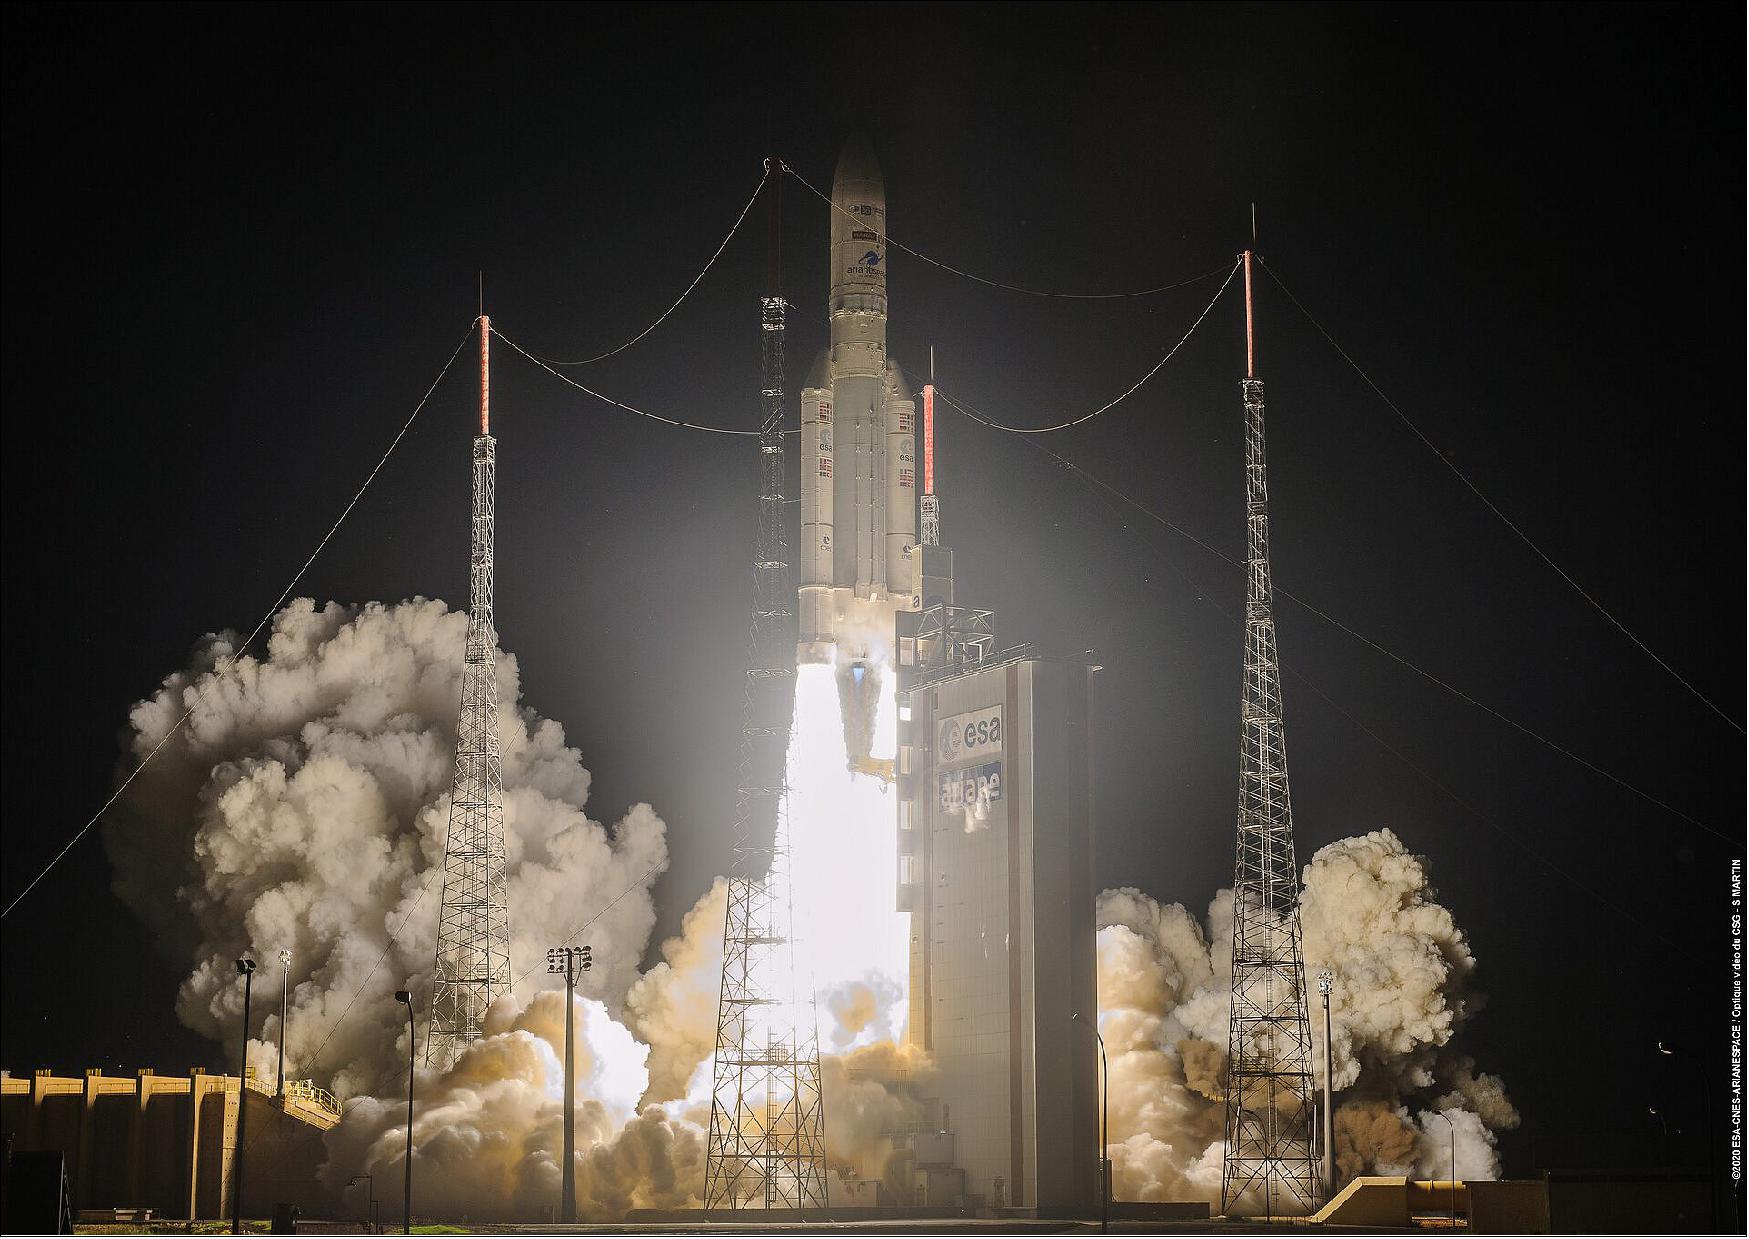 Figure 6: On 15 August 2020, Ariane 5 flight VA253 lifted off from Europe’s Spaceport in French Guiana and delivered two telecom satellites Galaxy-30 and BSAT-4B, and the Mission Extension Vehicle (MEV-2), into their planned transfer orbits (image credit: ESA/CNES/Arianespace)